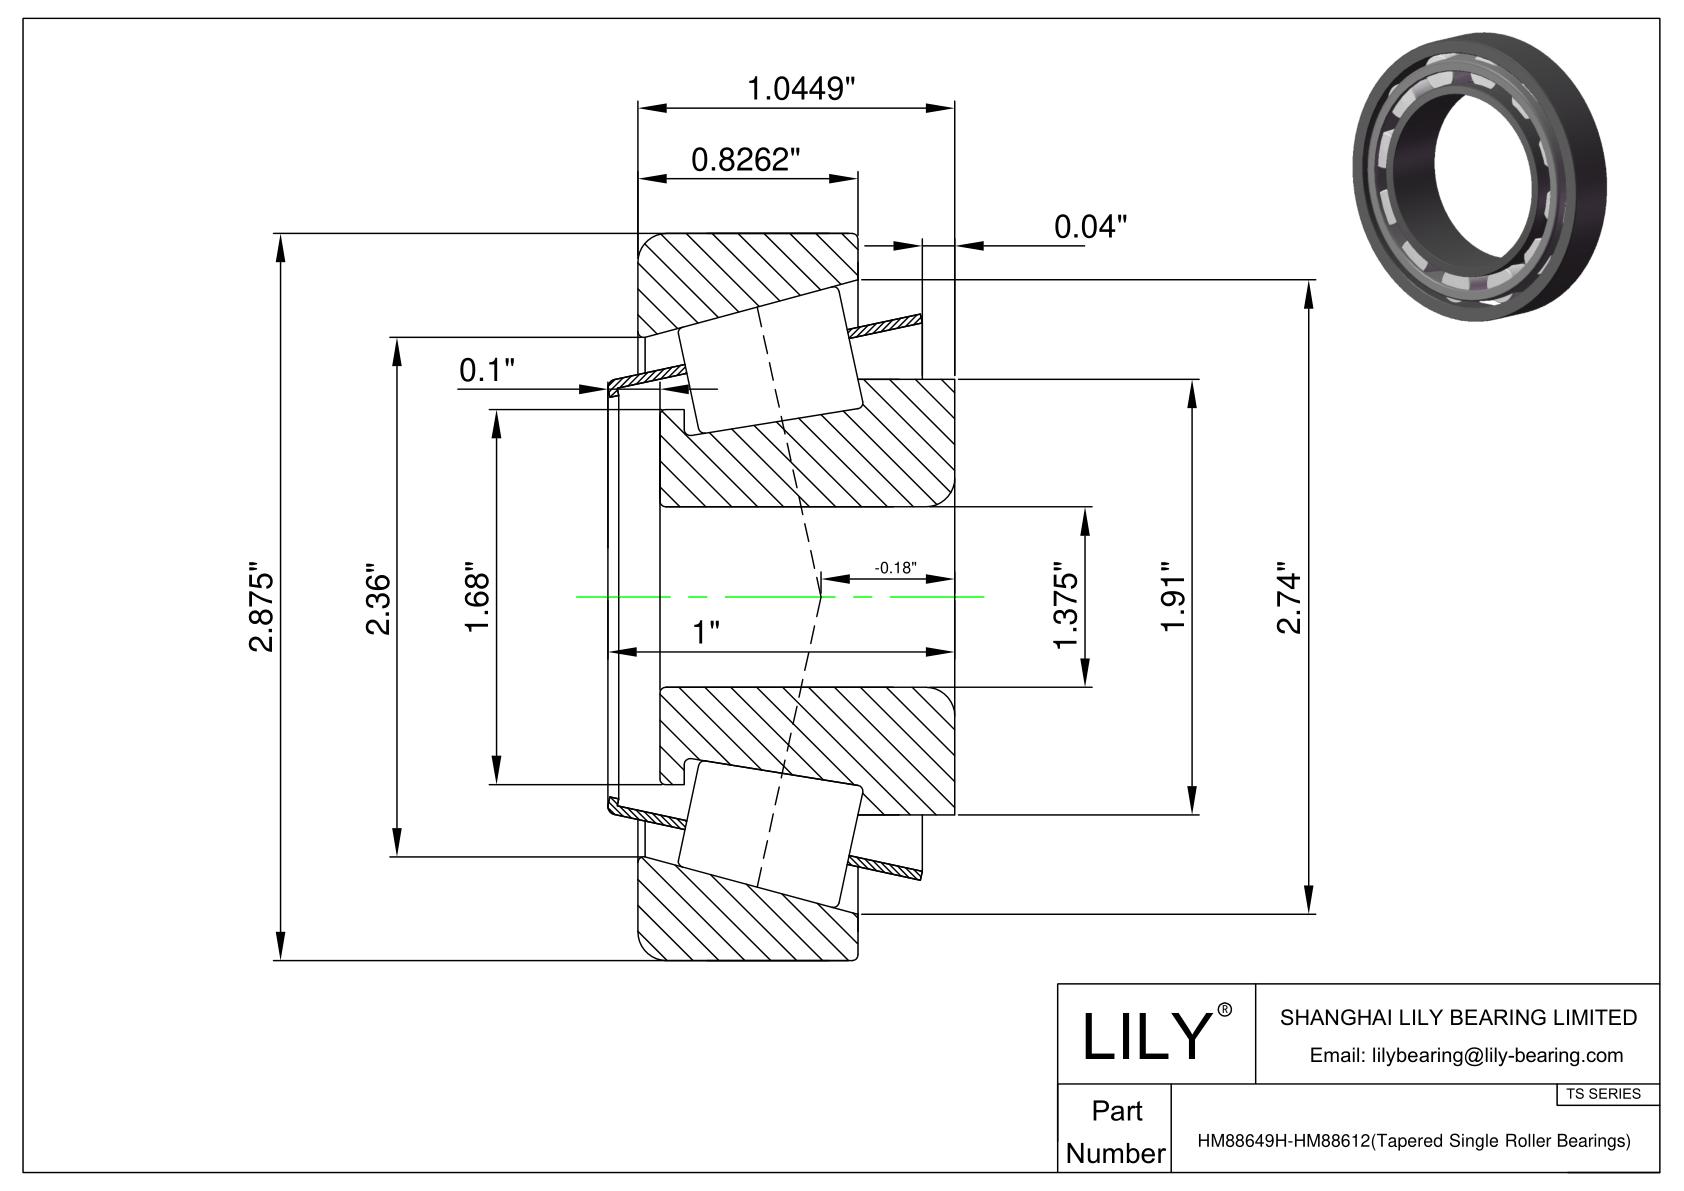 HM88649H-HM88612 TS (Tapered Single Roller Bearings) (Imperial) cad drawing